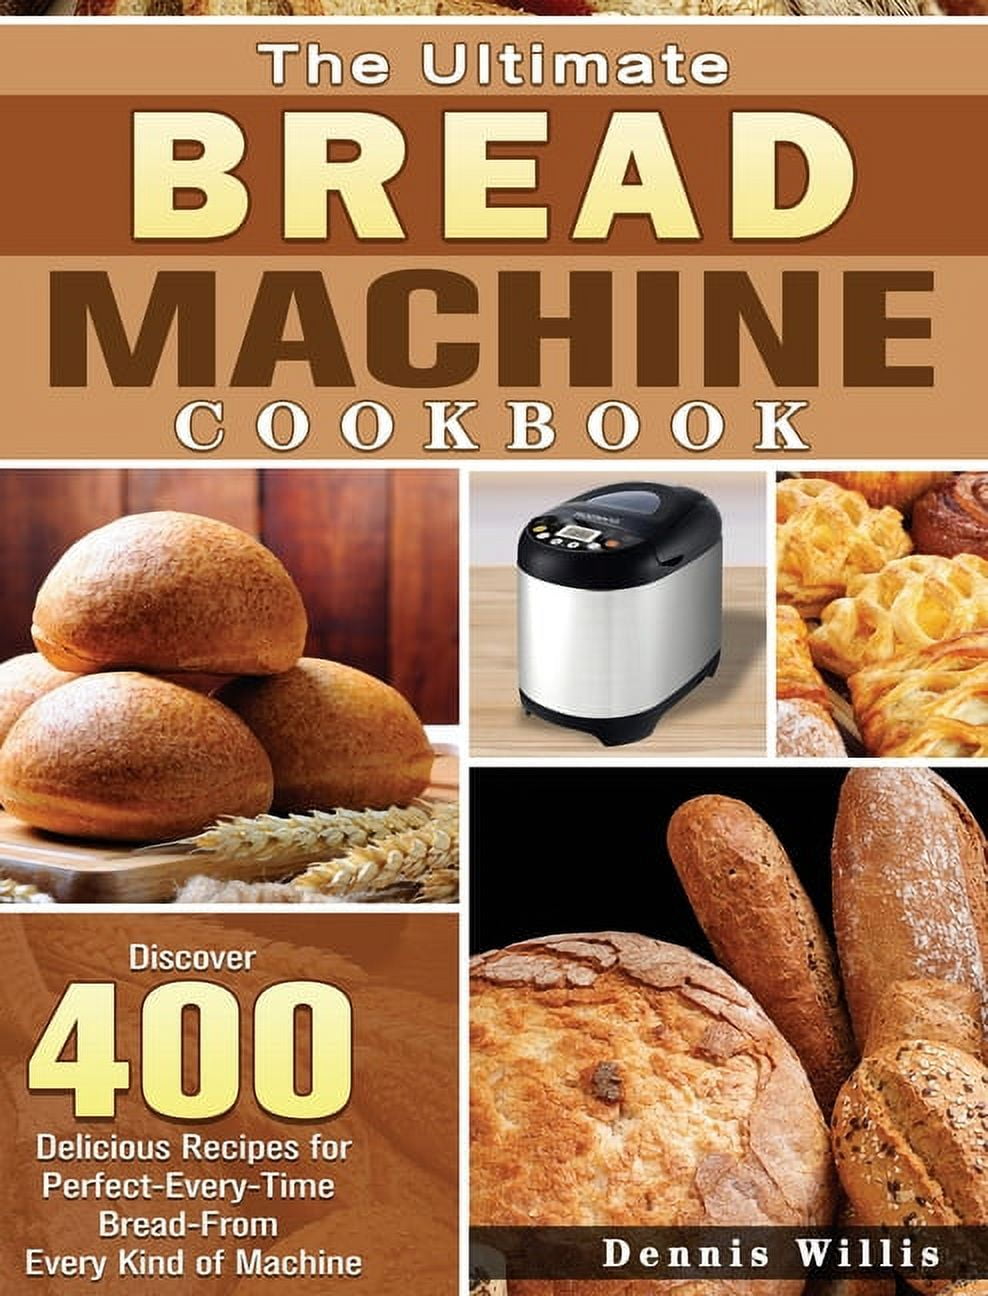 Bread Machines :: Information from Real Restaurant Recipes